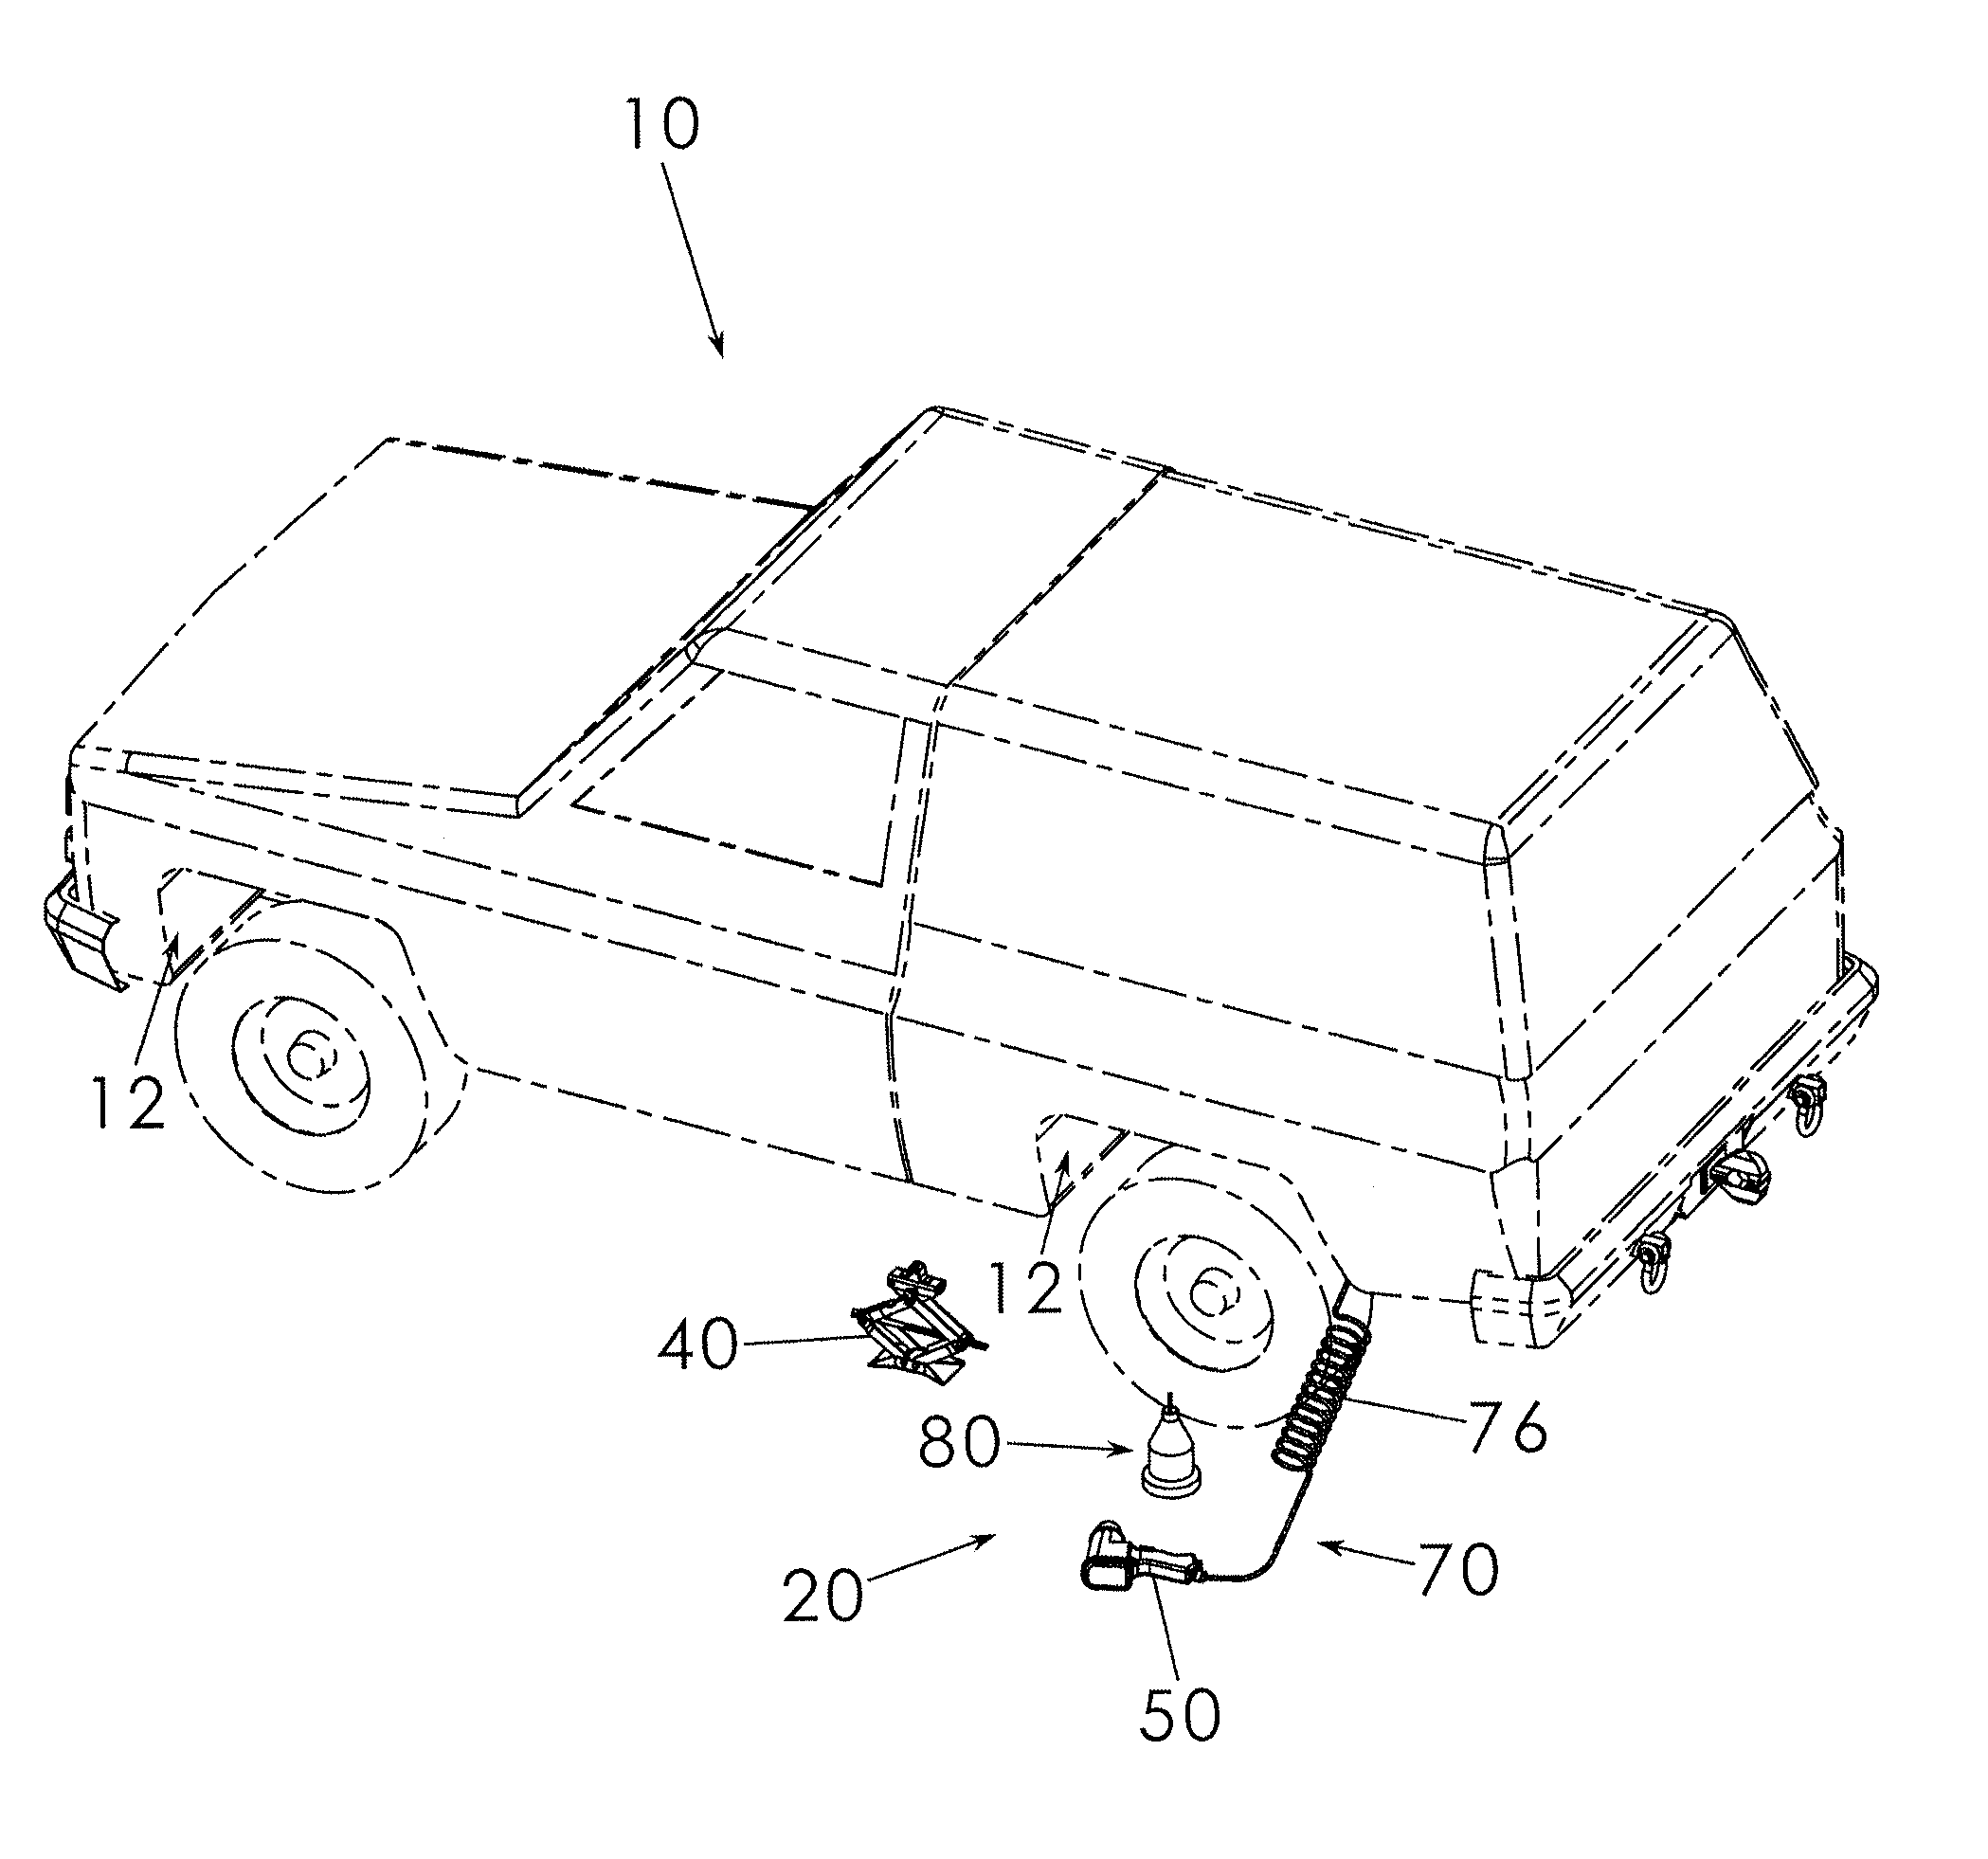 Tire changing system for vehicle